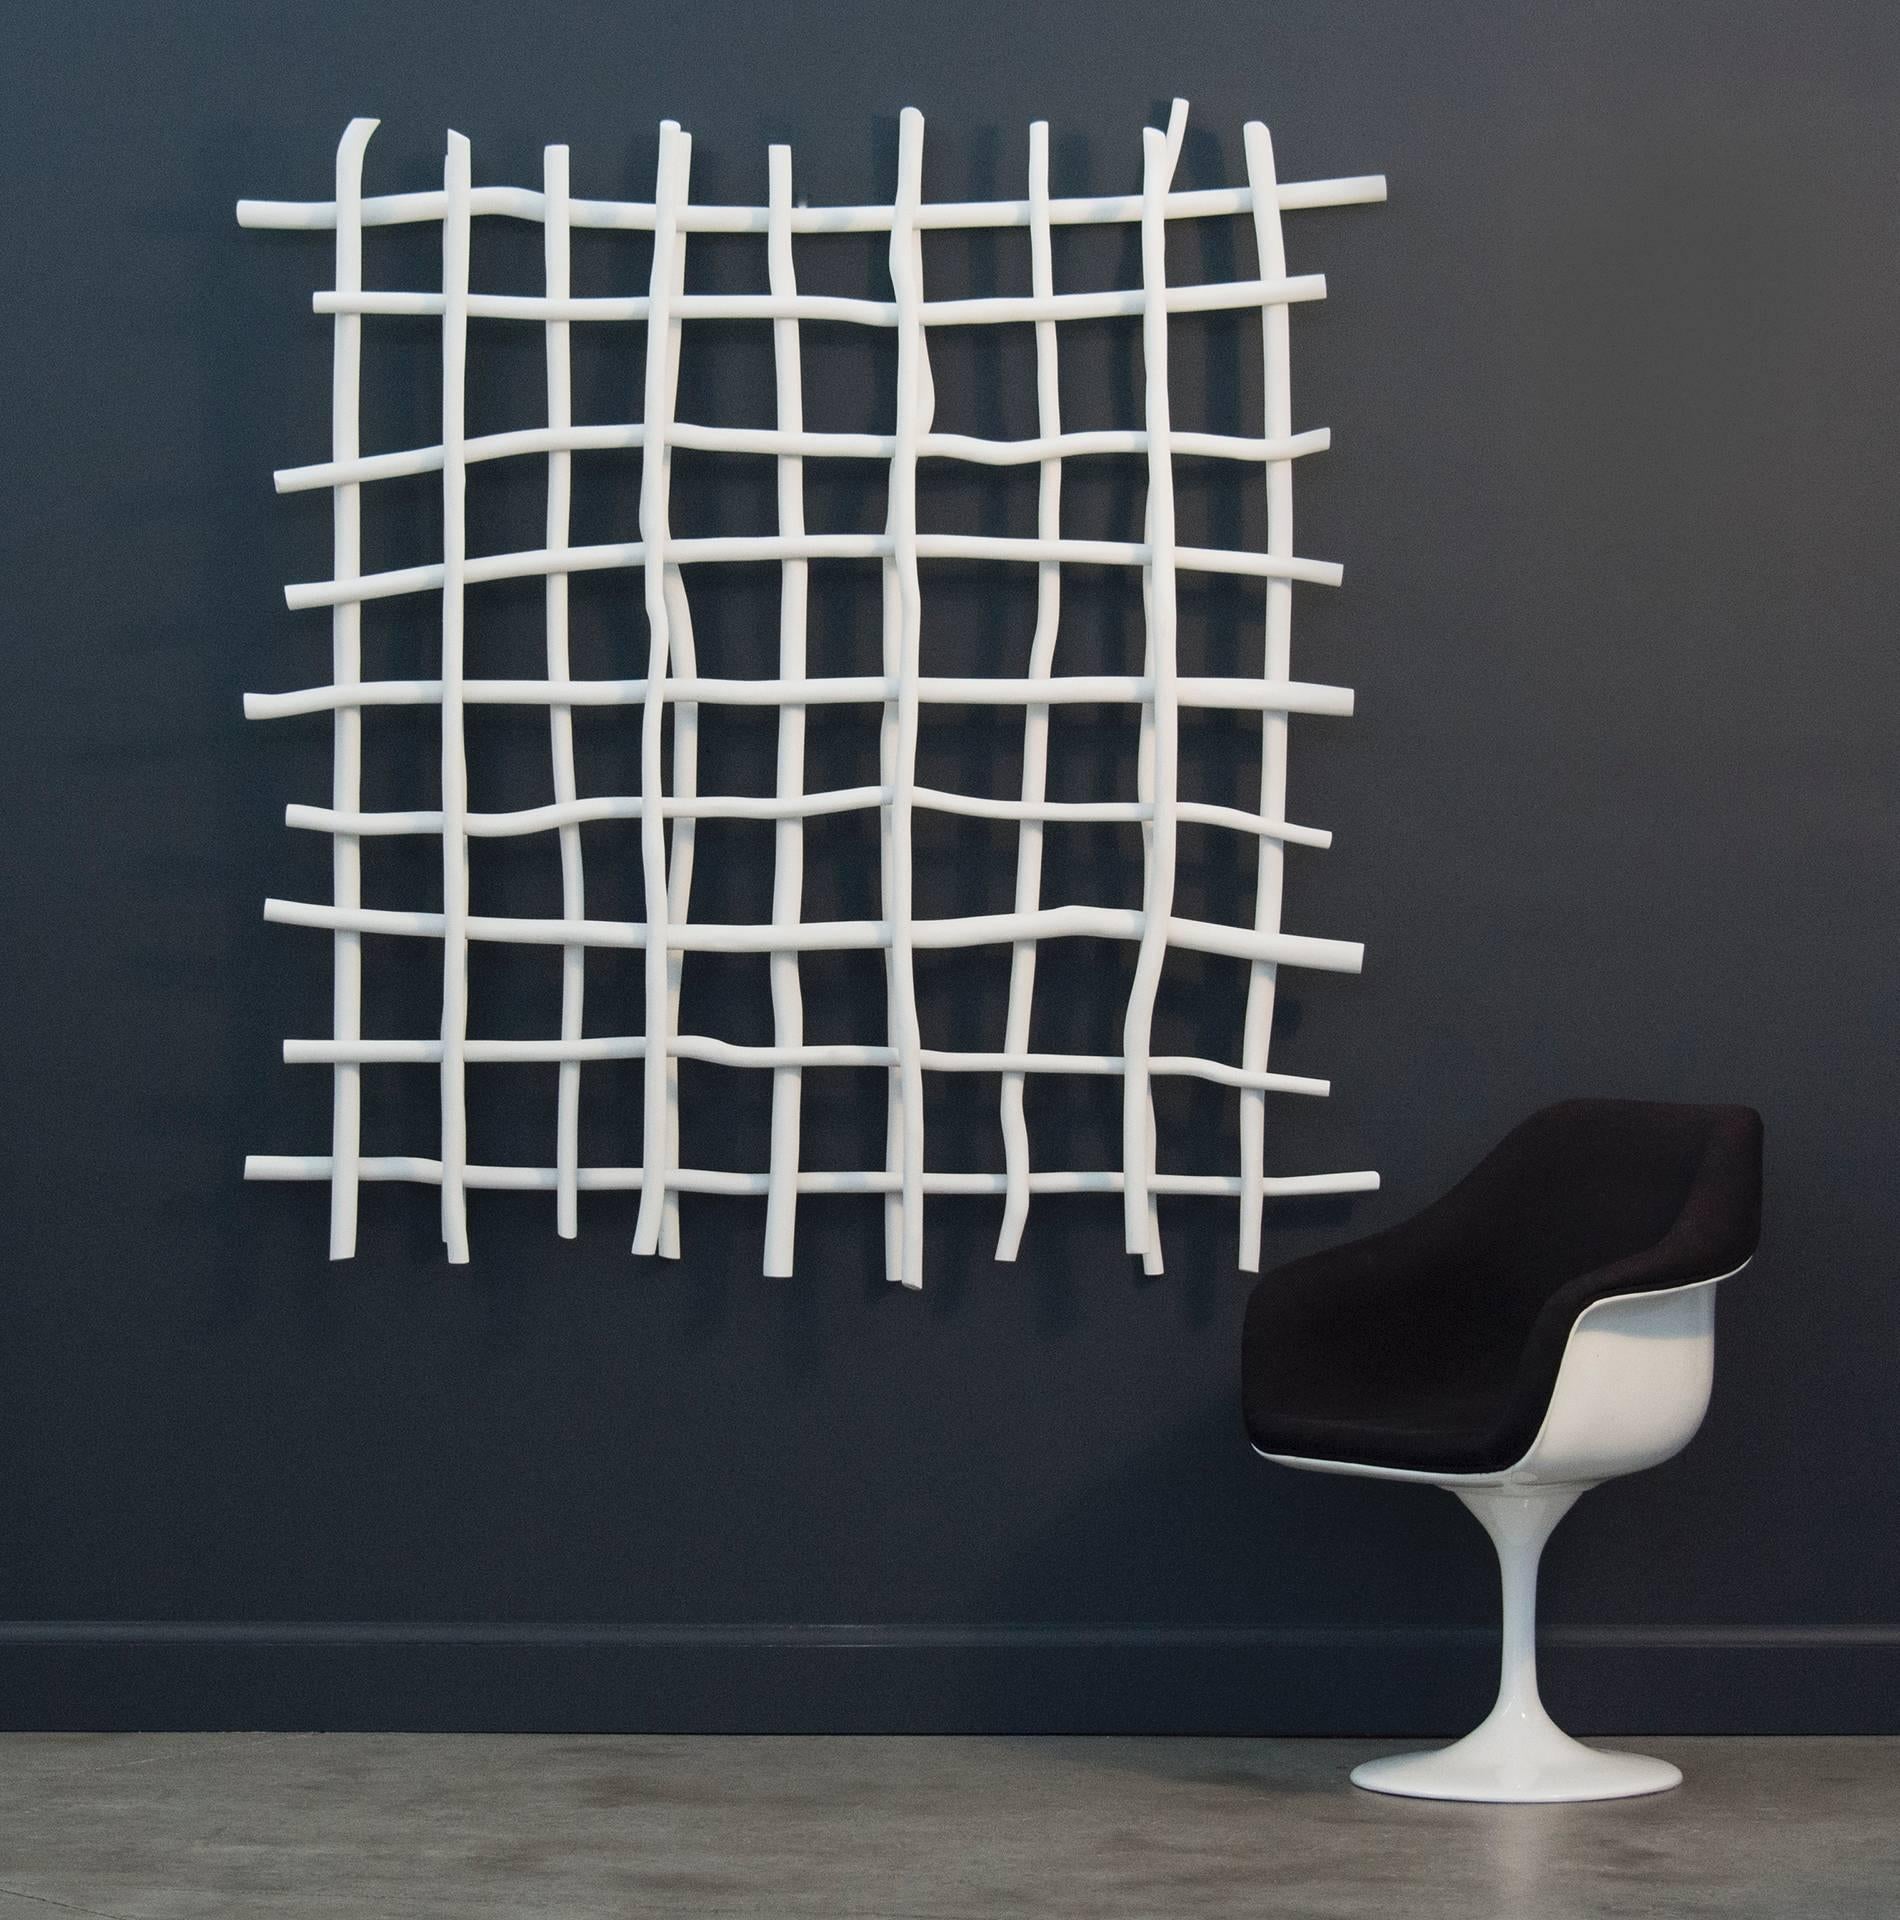 Gridlock II - bright, white, intersecting, grid, bent aluminum wall sculpture - Abstract Sculpture by Shayne Dark